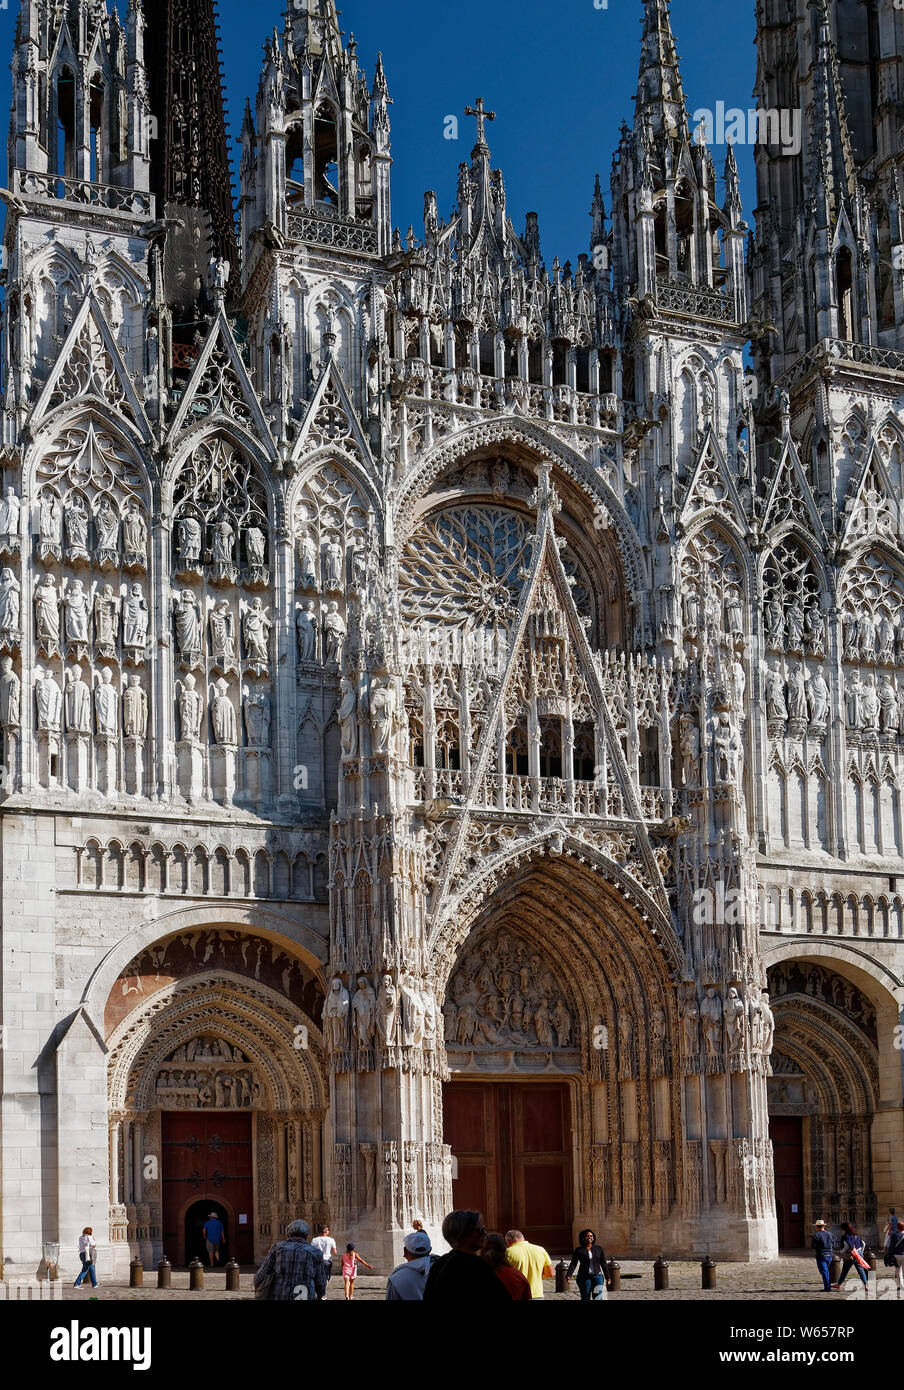 notre-dame-cathedral-ornate-west-facade-12-16-century-gothic-gables-statues-turrets-rose-window-flamboyant-stonework-tree-of-jesse-main-porta-W657RP.jpg